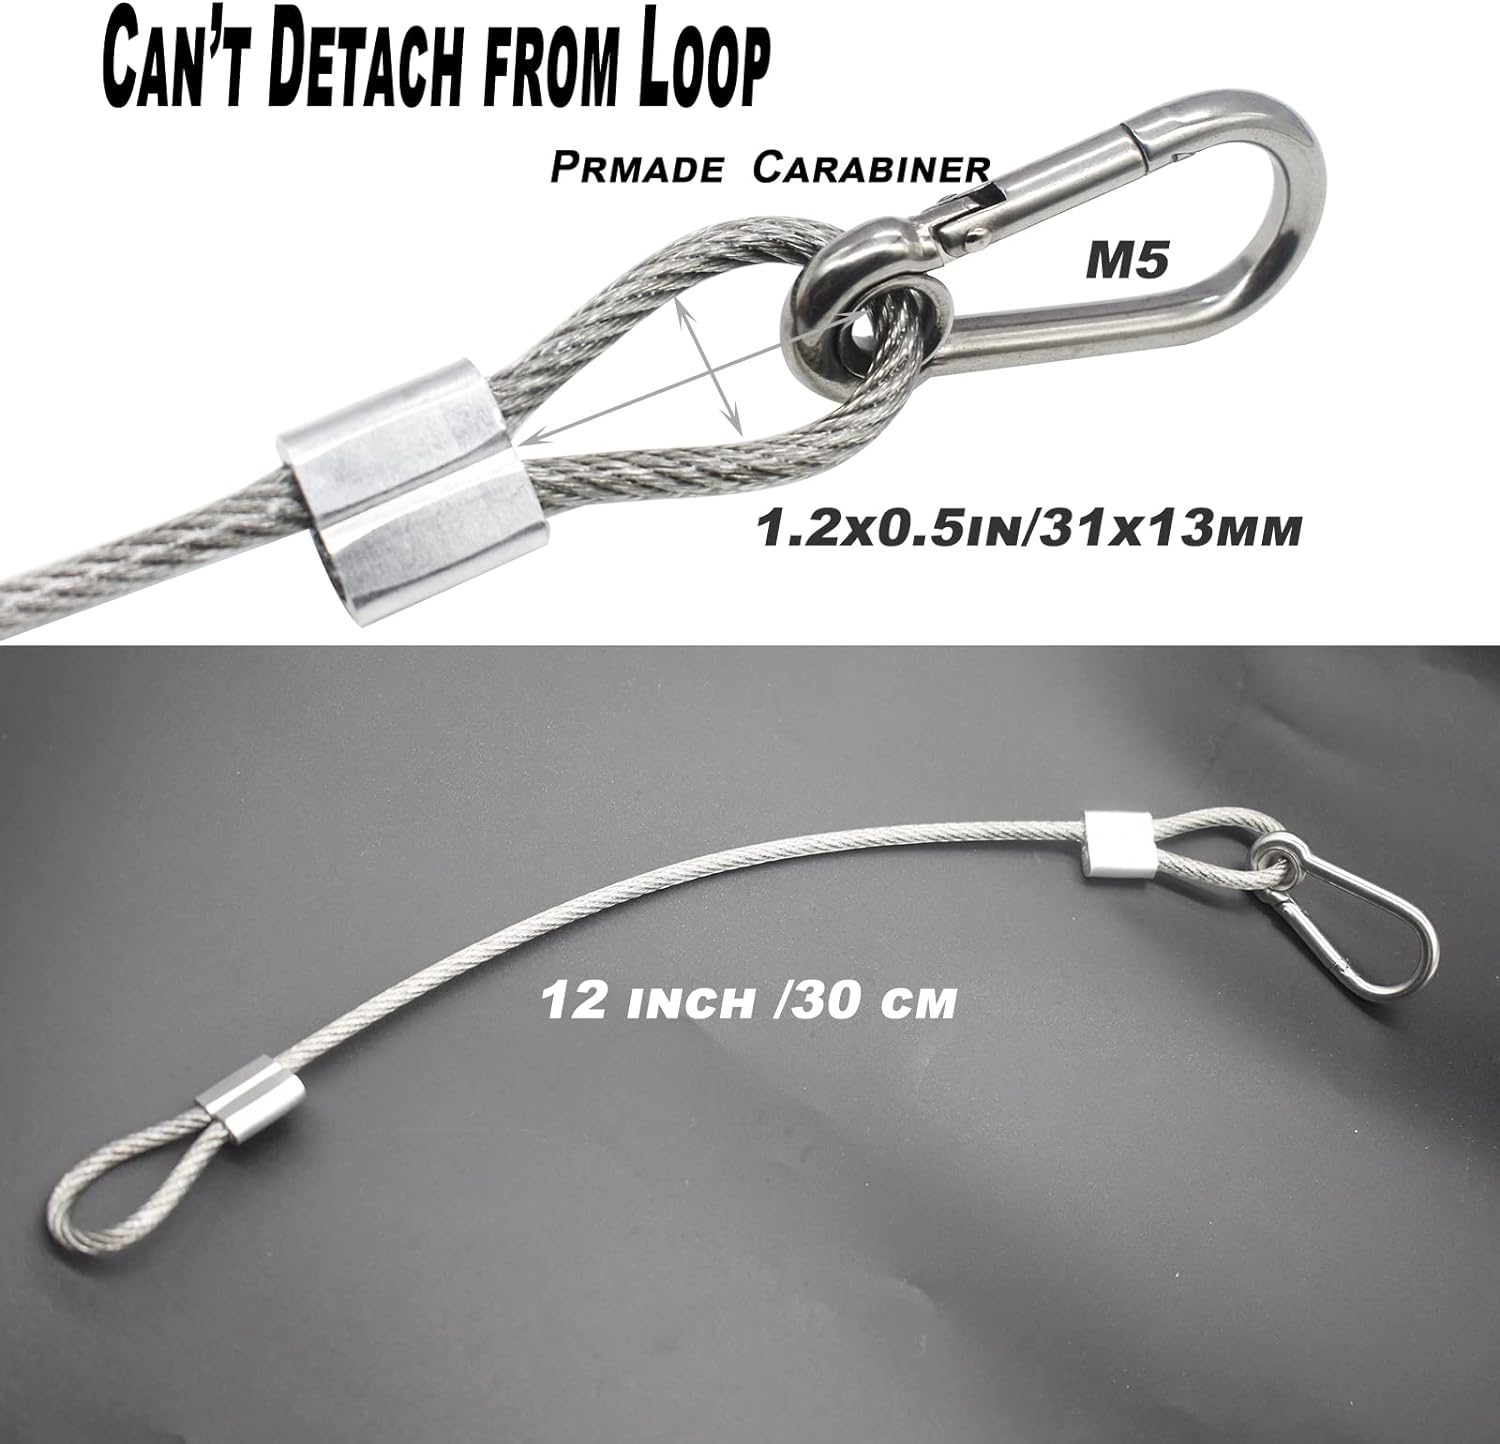 Faocean Bytiyar 10 pcs 12 inch (30cm) Vinyl Cover Coated Stainless Steel Wire Cable with Loops and Carabiner Hook Short Security Rope L